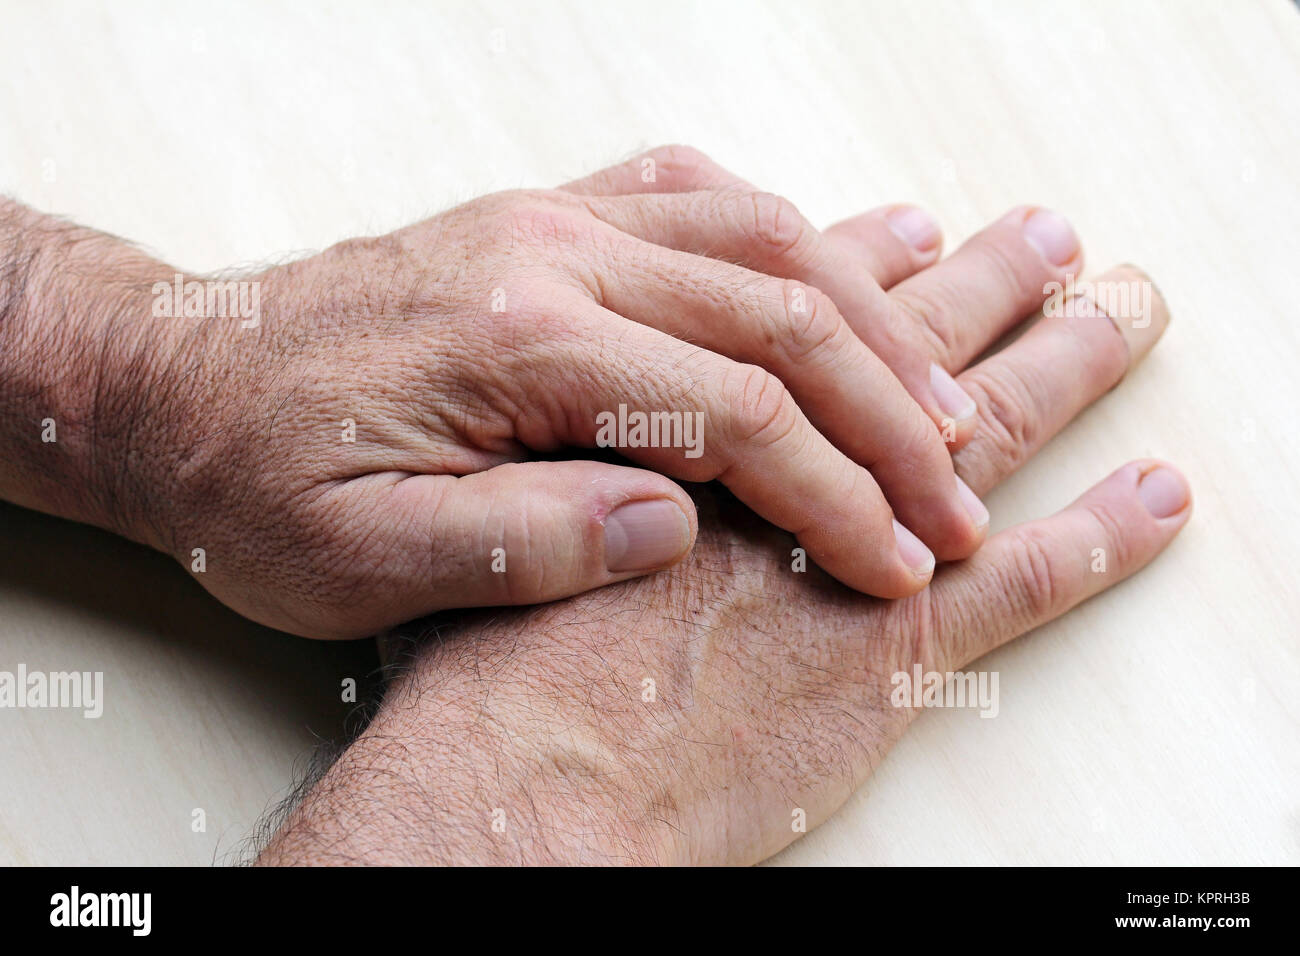 an elderly man has pain in fingers and hands Stock Photo